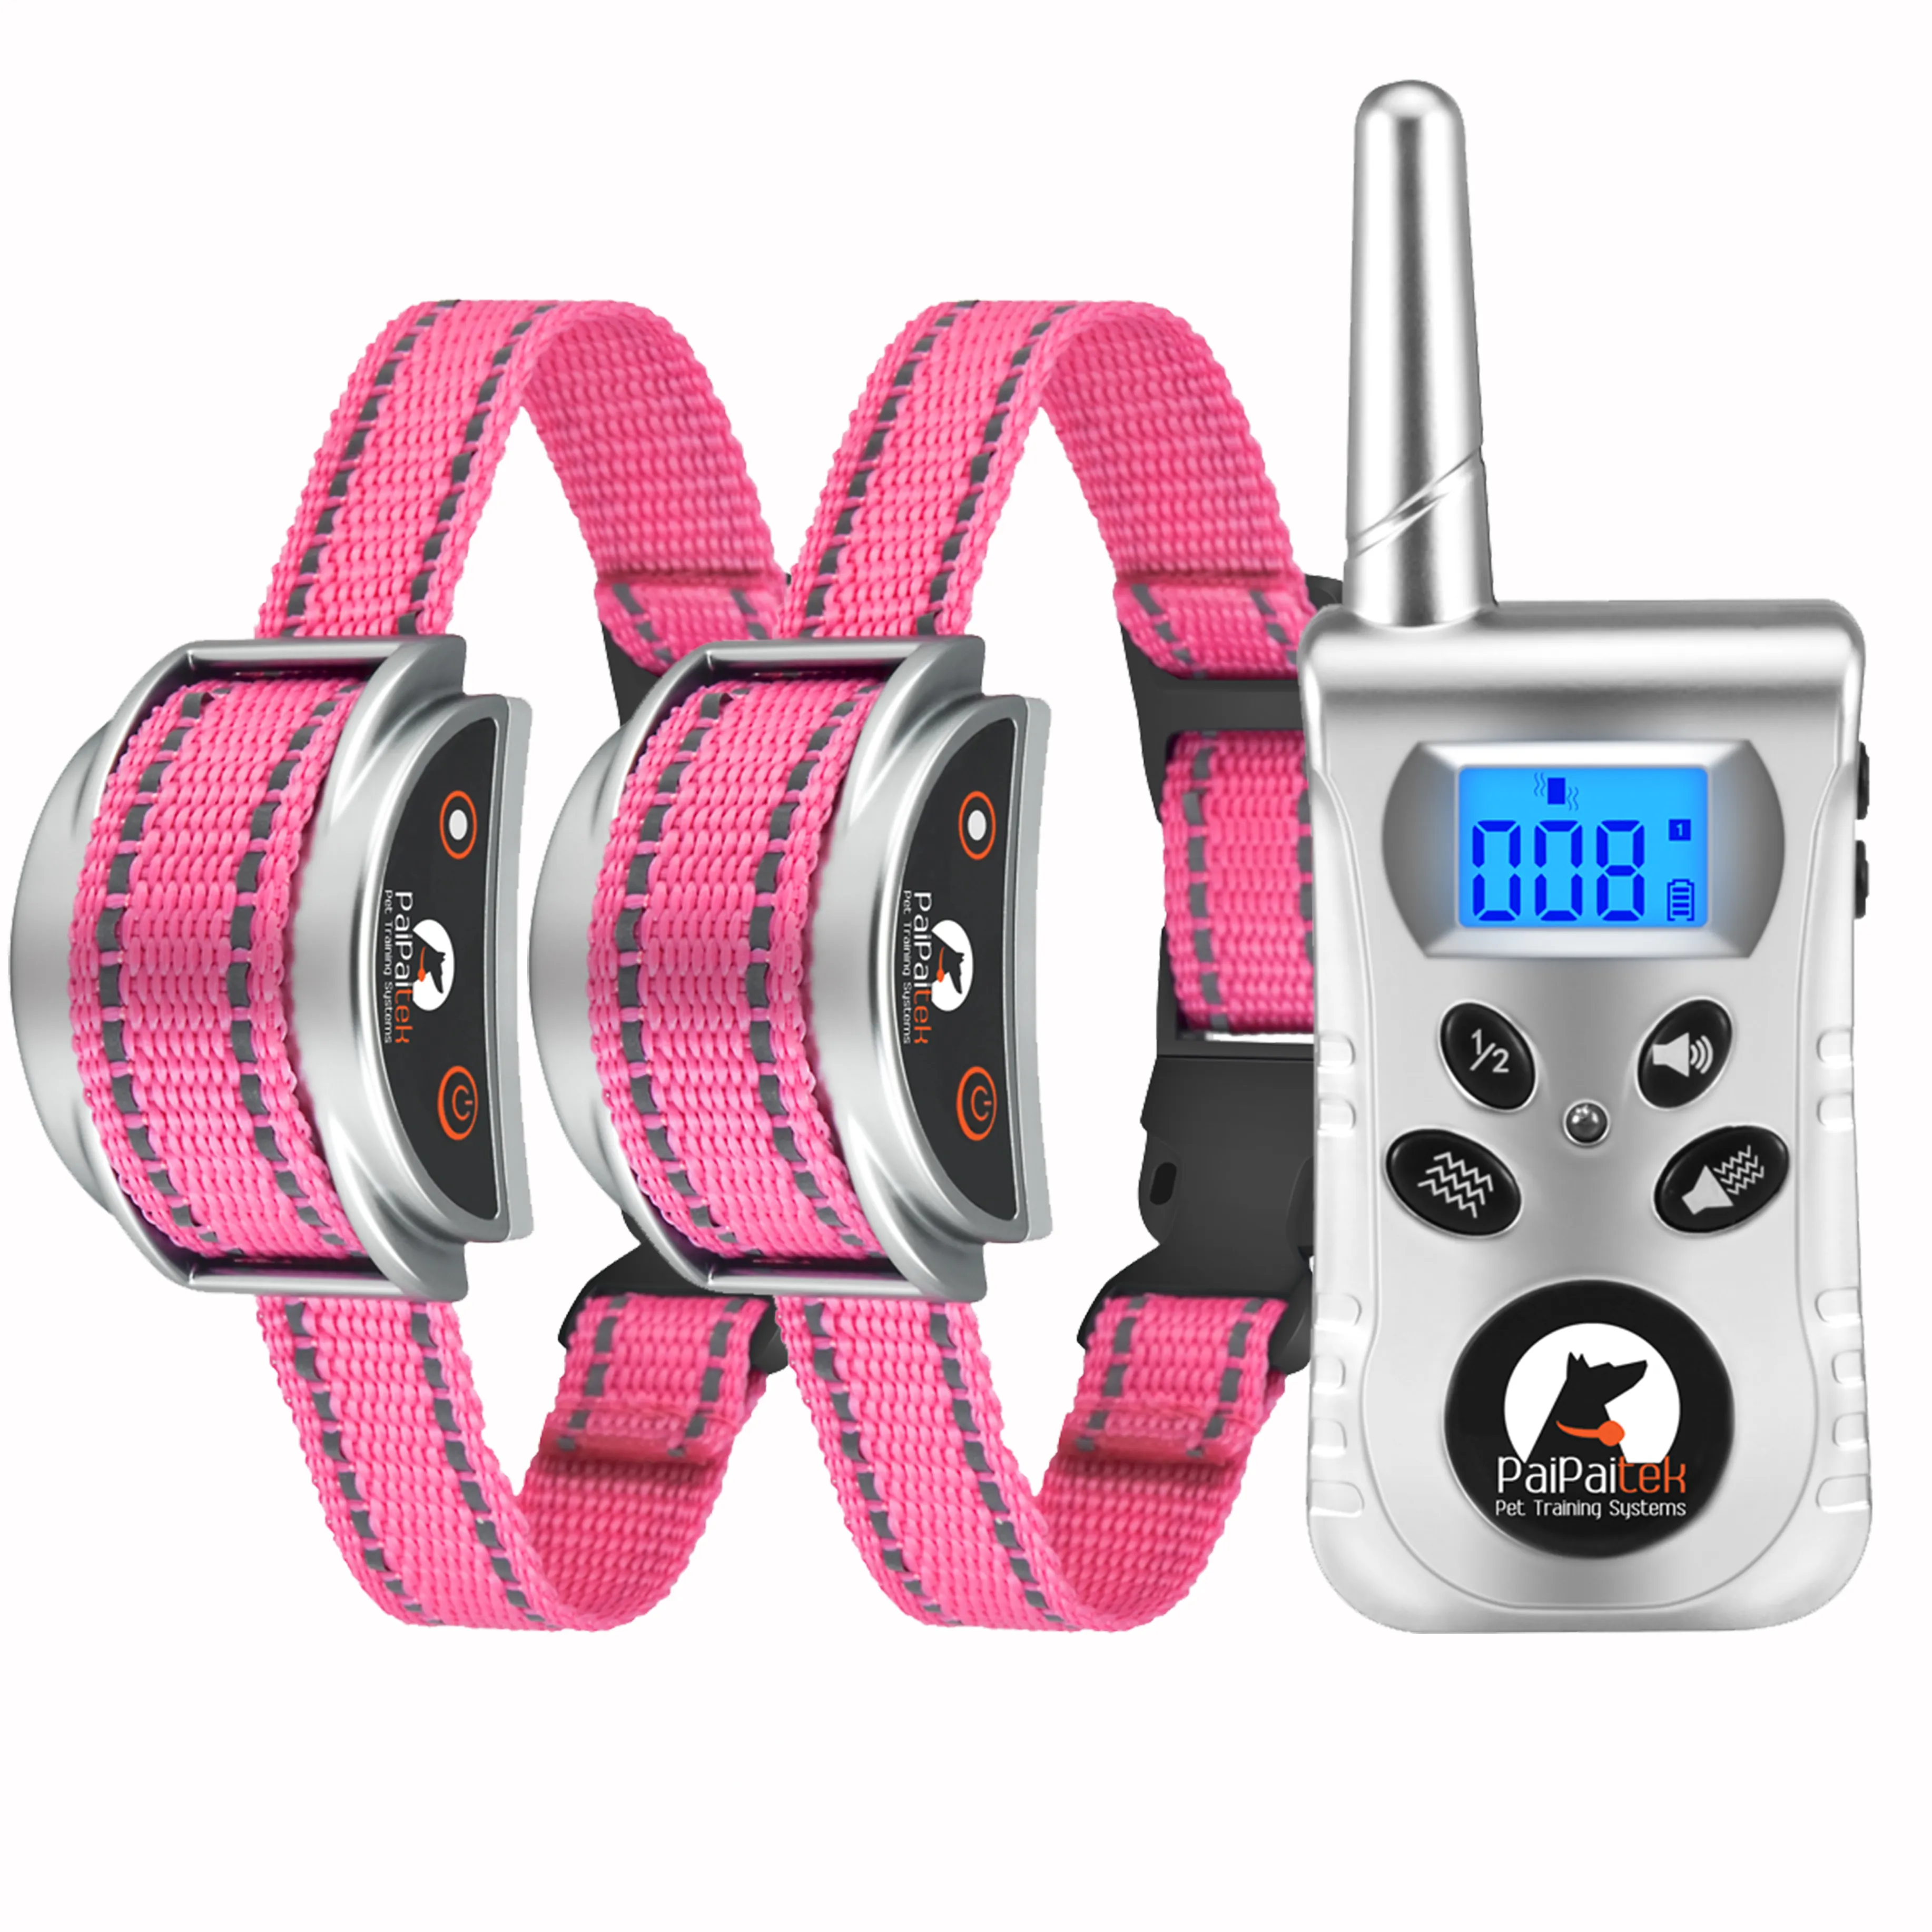 2024 low price and high quality dog no shock training collar dog prong training collars remote control dog train collar